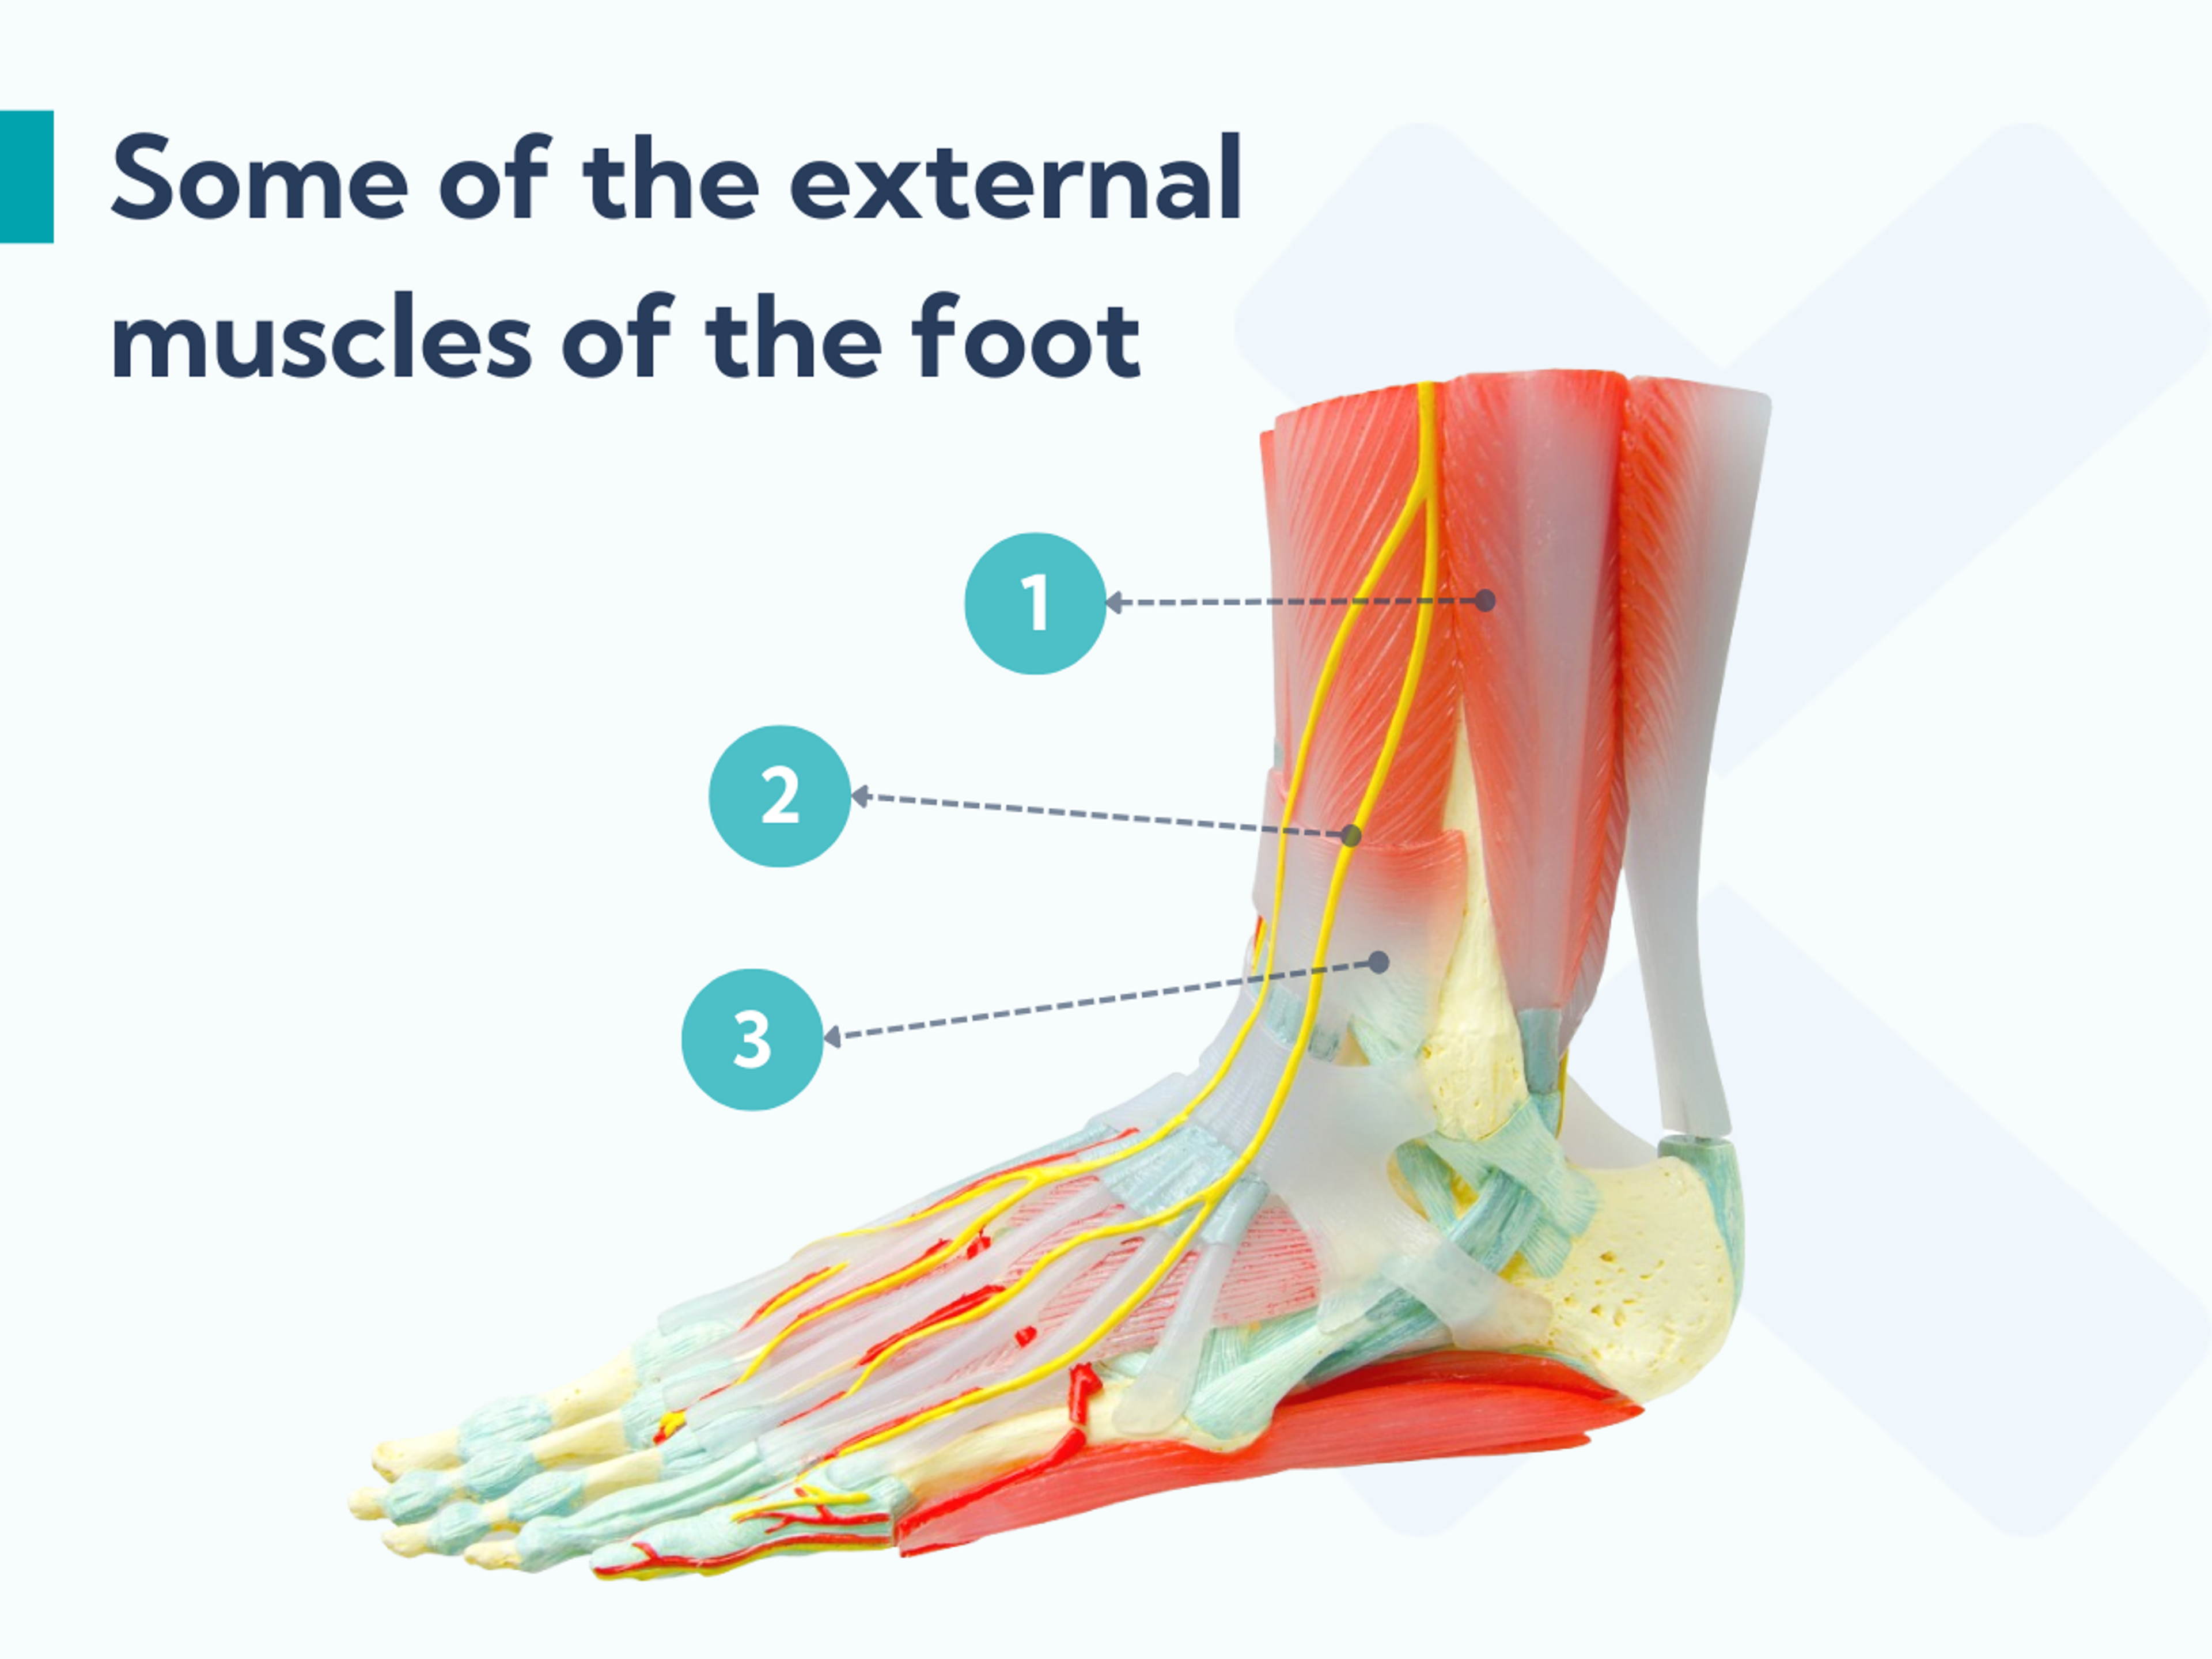 The external muscles of the foot